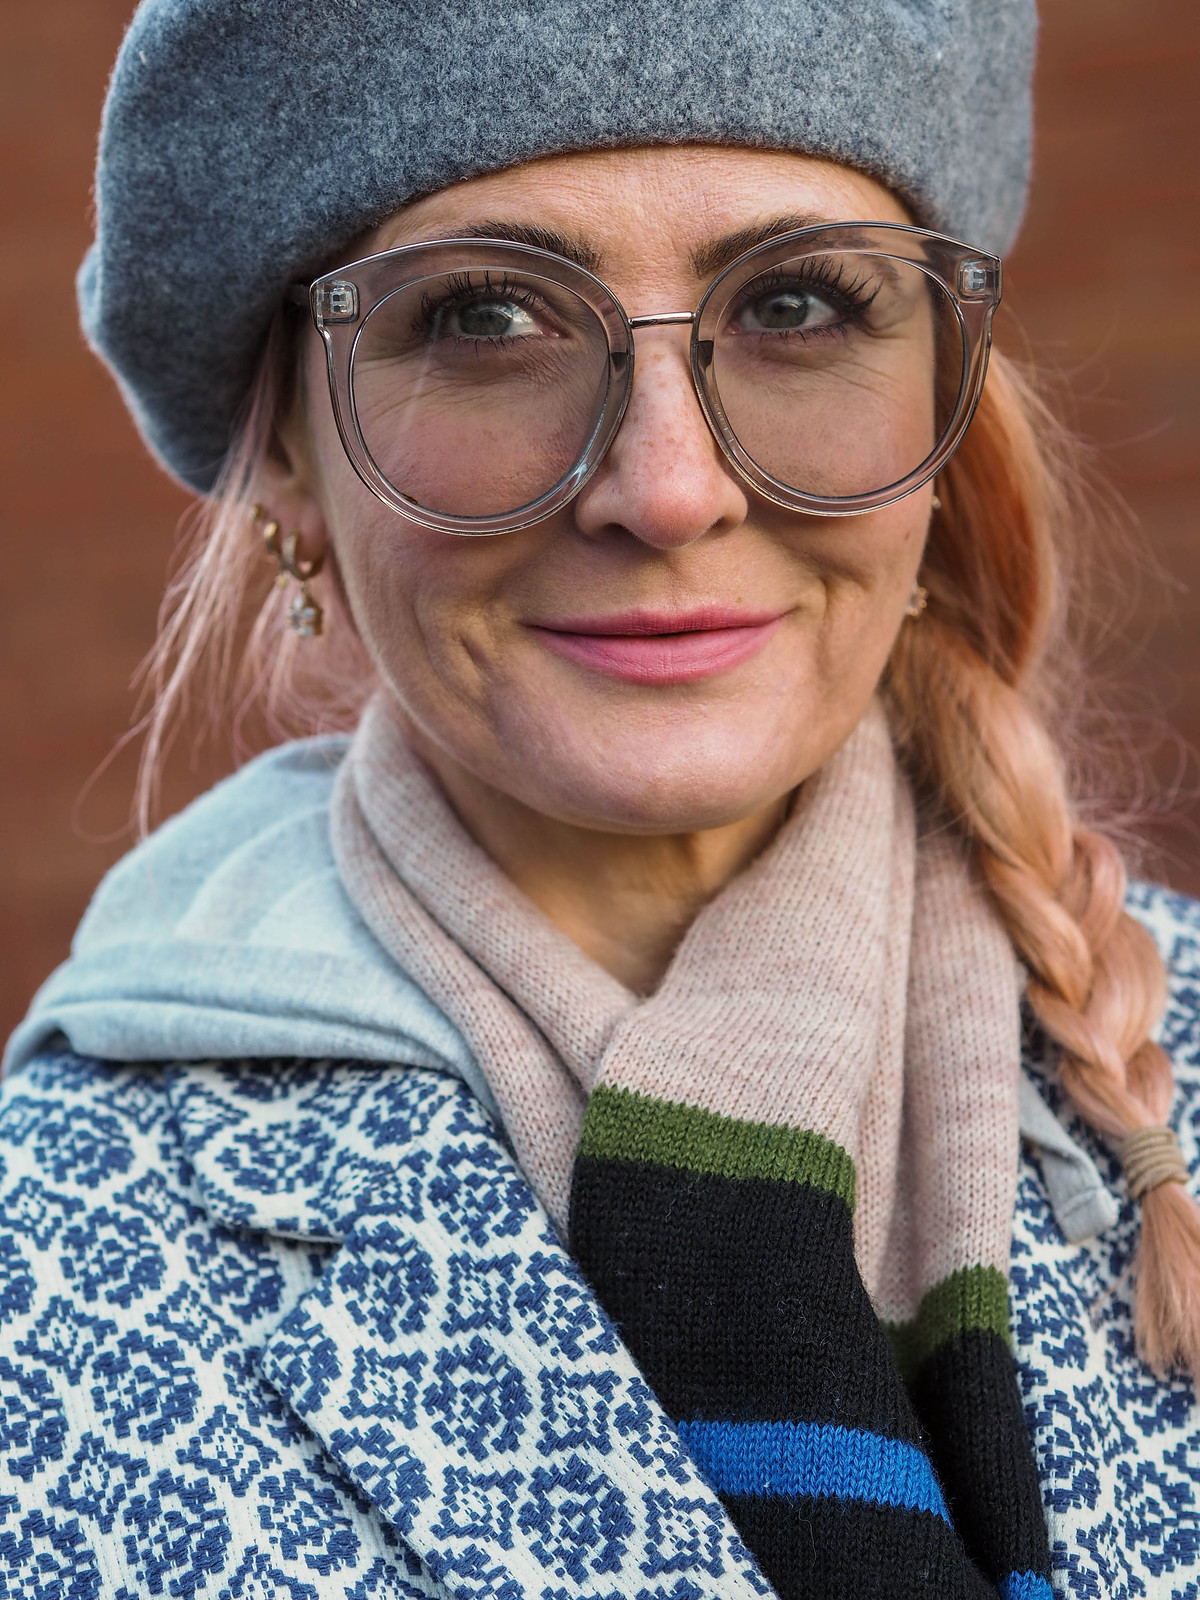 How I Styled My Old School Scarf: With a blue jacquard coat, wide leg jeans, wellies and a beret | Not Dressed As Lamb, fashion for over 40s